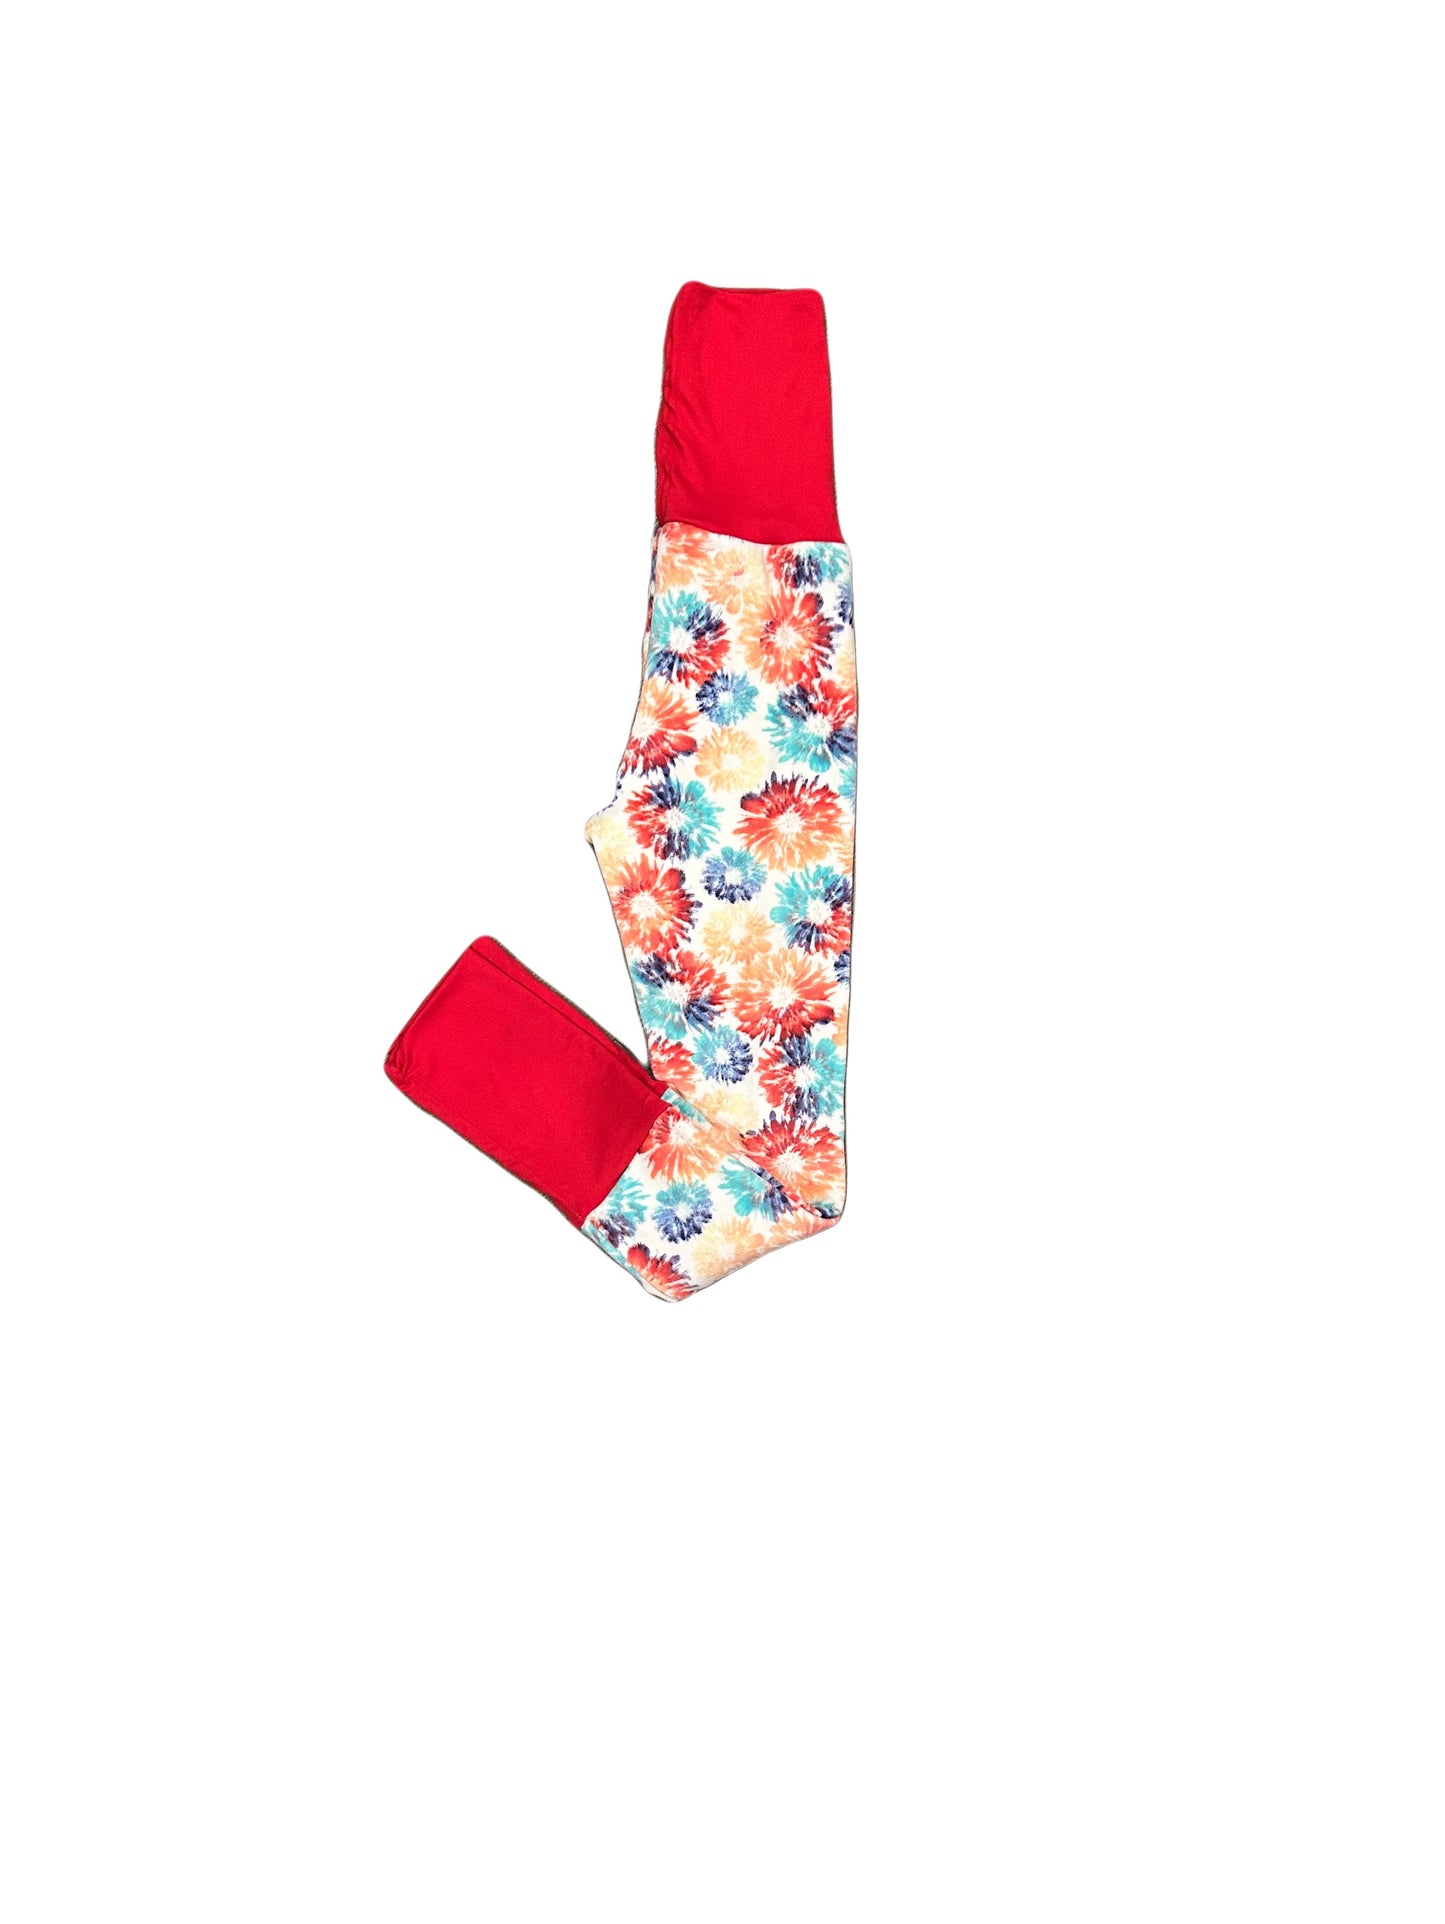 Large Adjustable Pants - abstract flowers with red